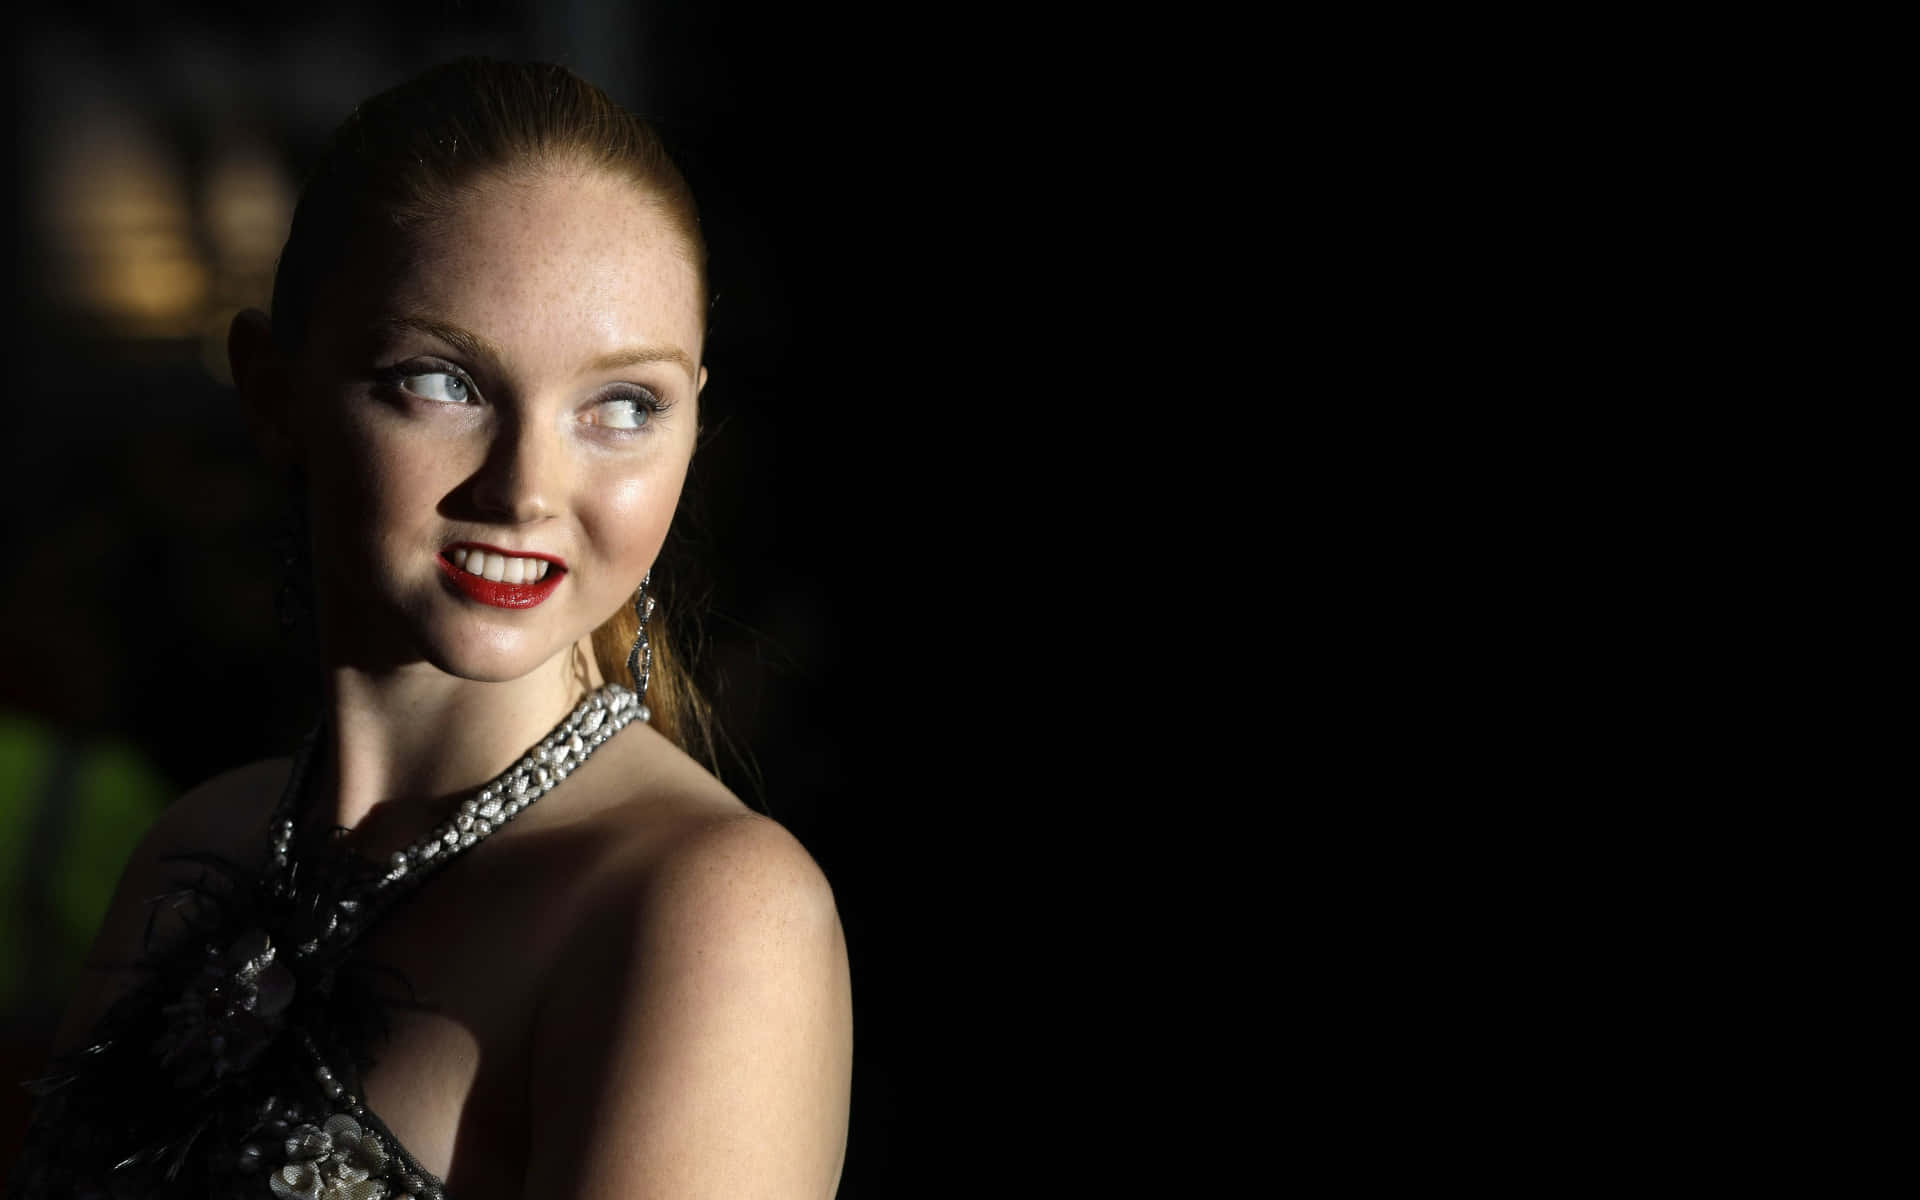 British Model Lily Cole Posing With Stunning Blue Eyes Wallpaper